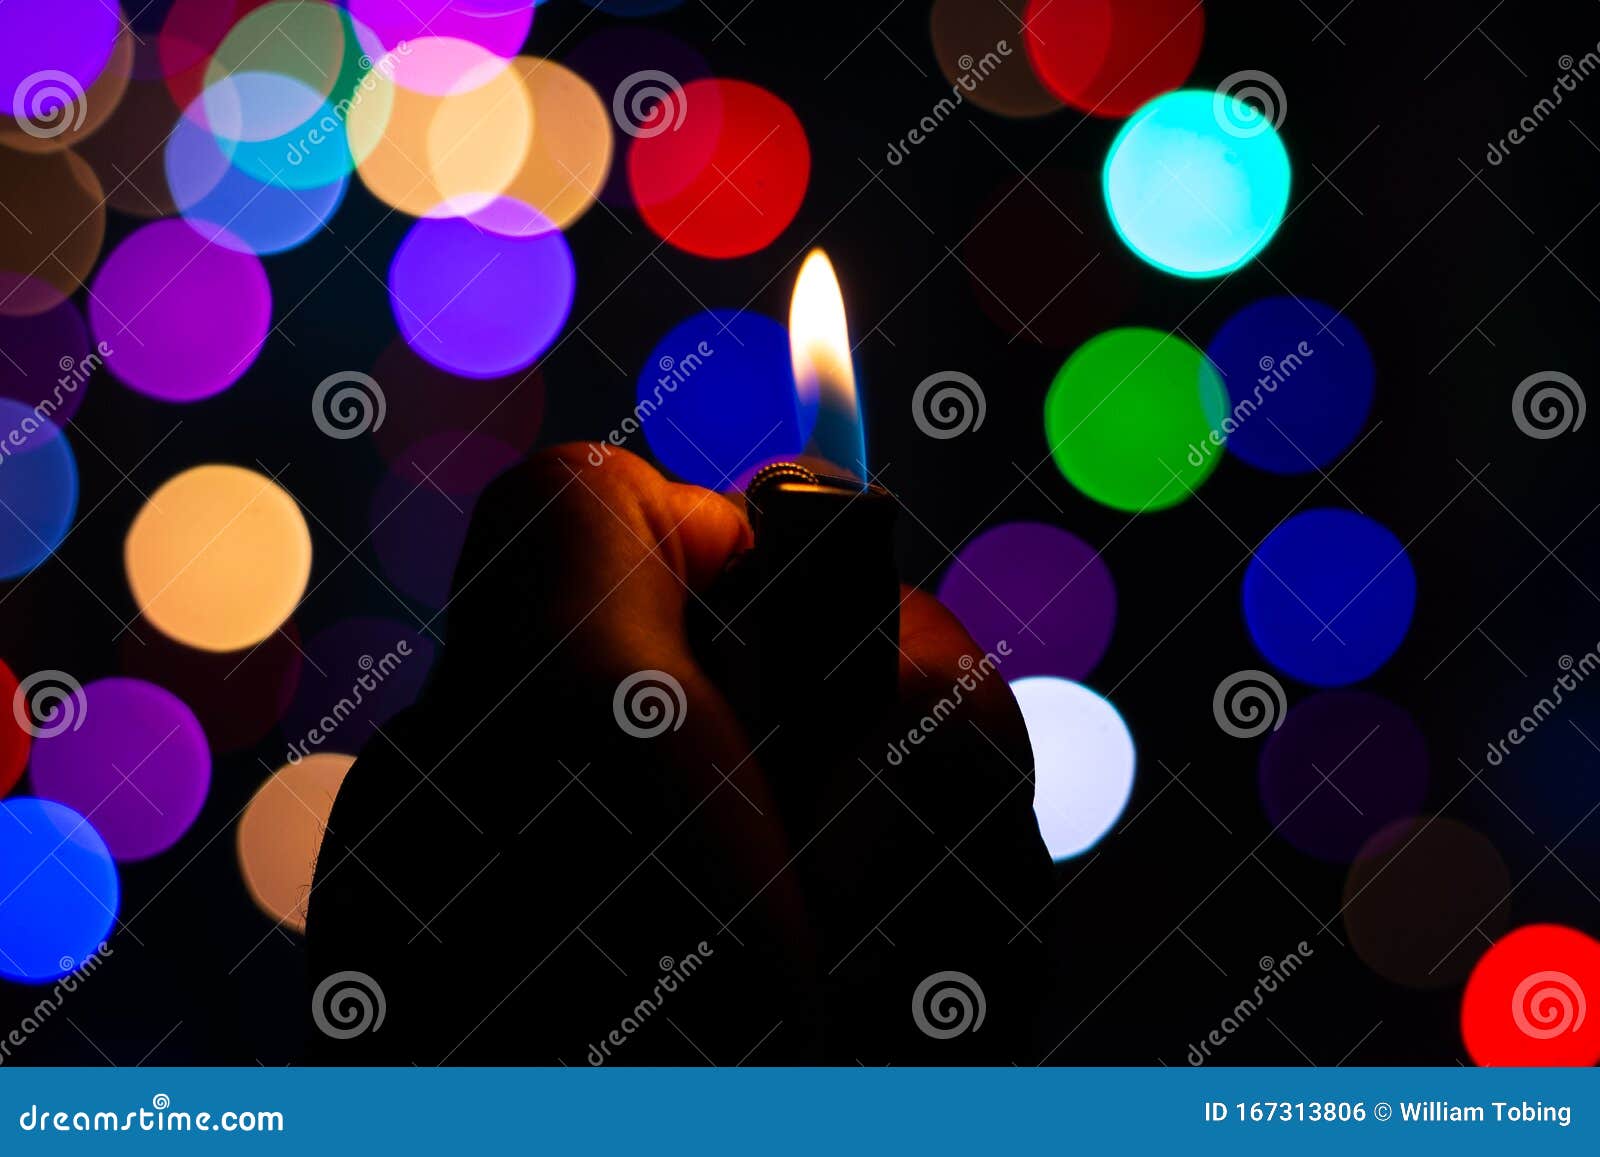 christmas scenery silent night candle light on dark with colorful blur background